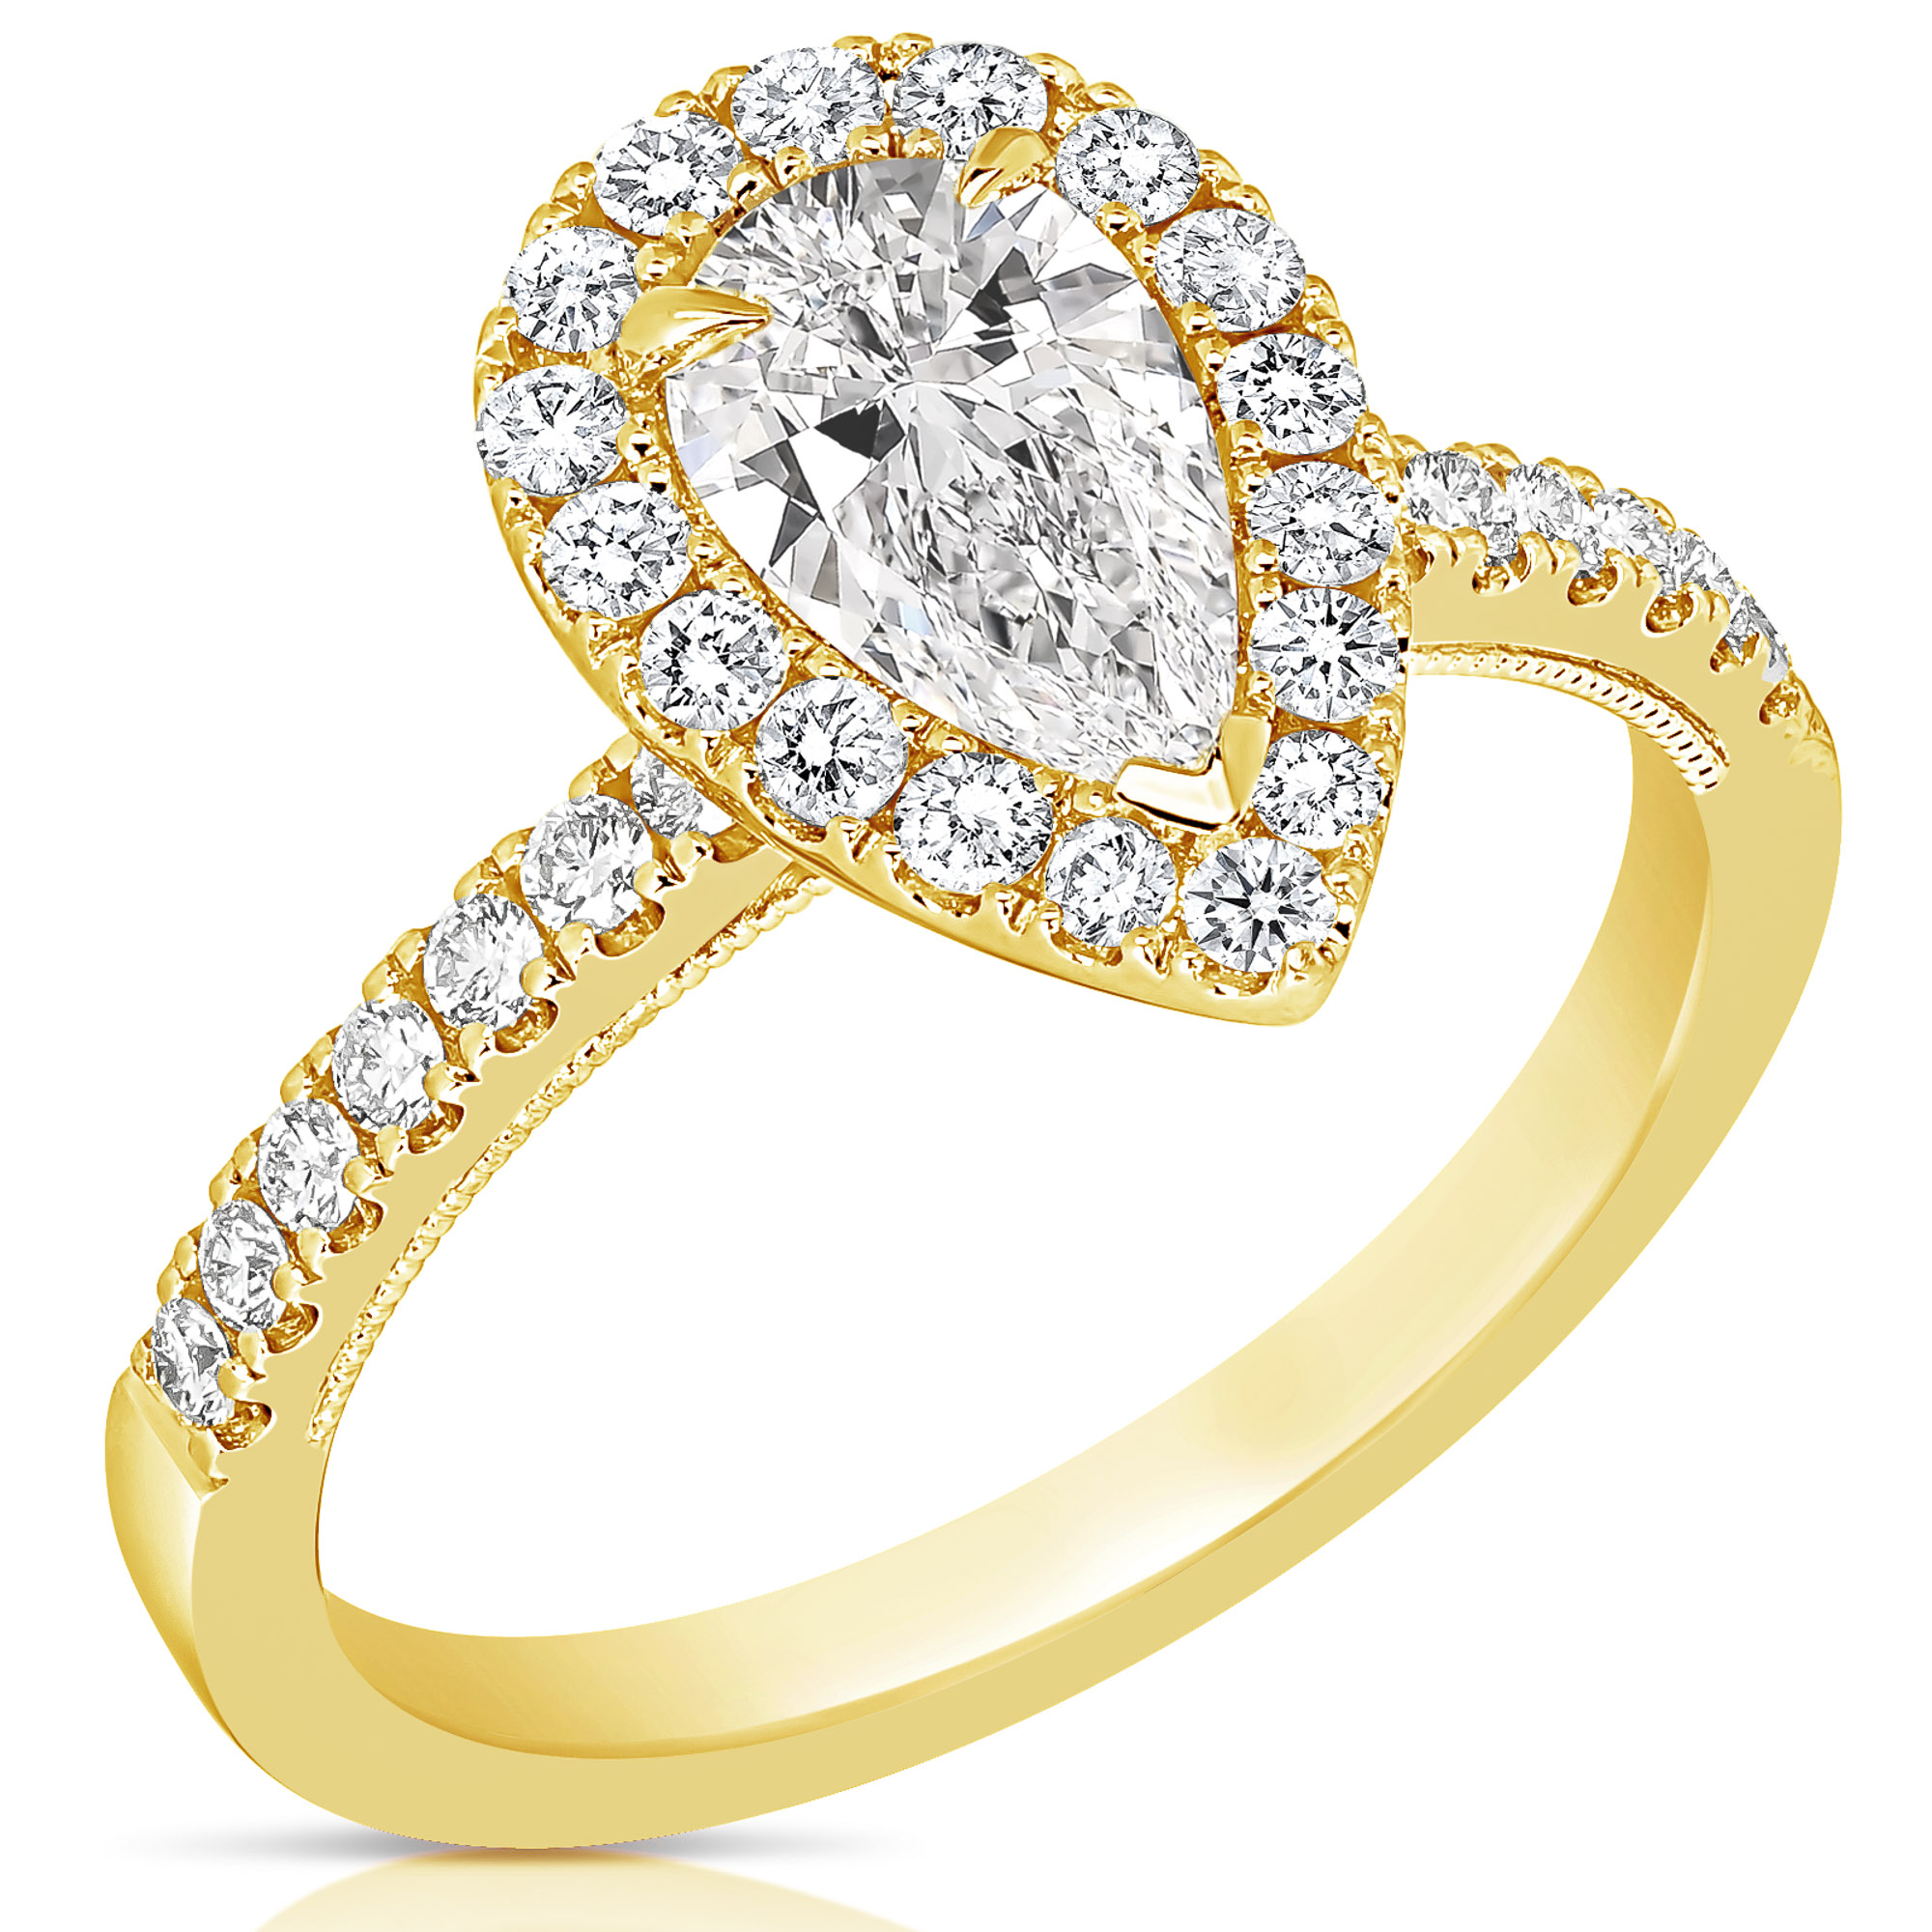 14 Karat Yellow Gold 1.11 Cts Pear Shape Diamond Halo Engagement Ring with 0.63 ct